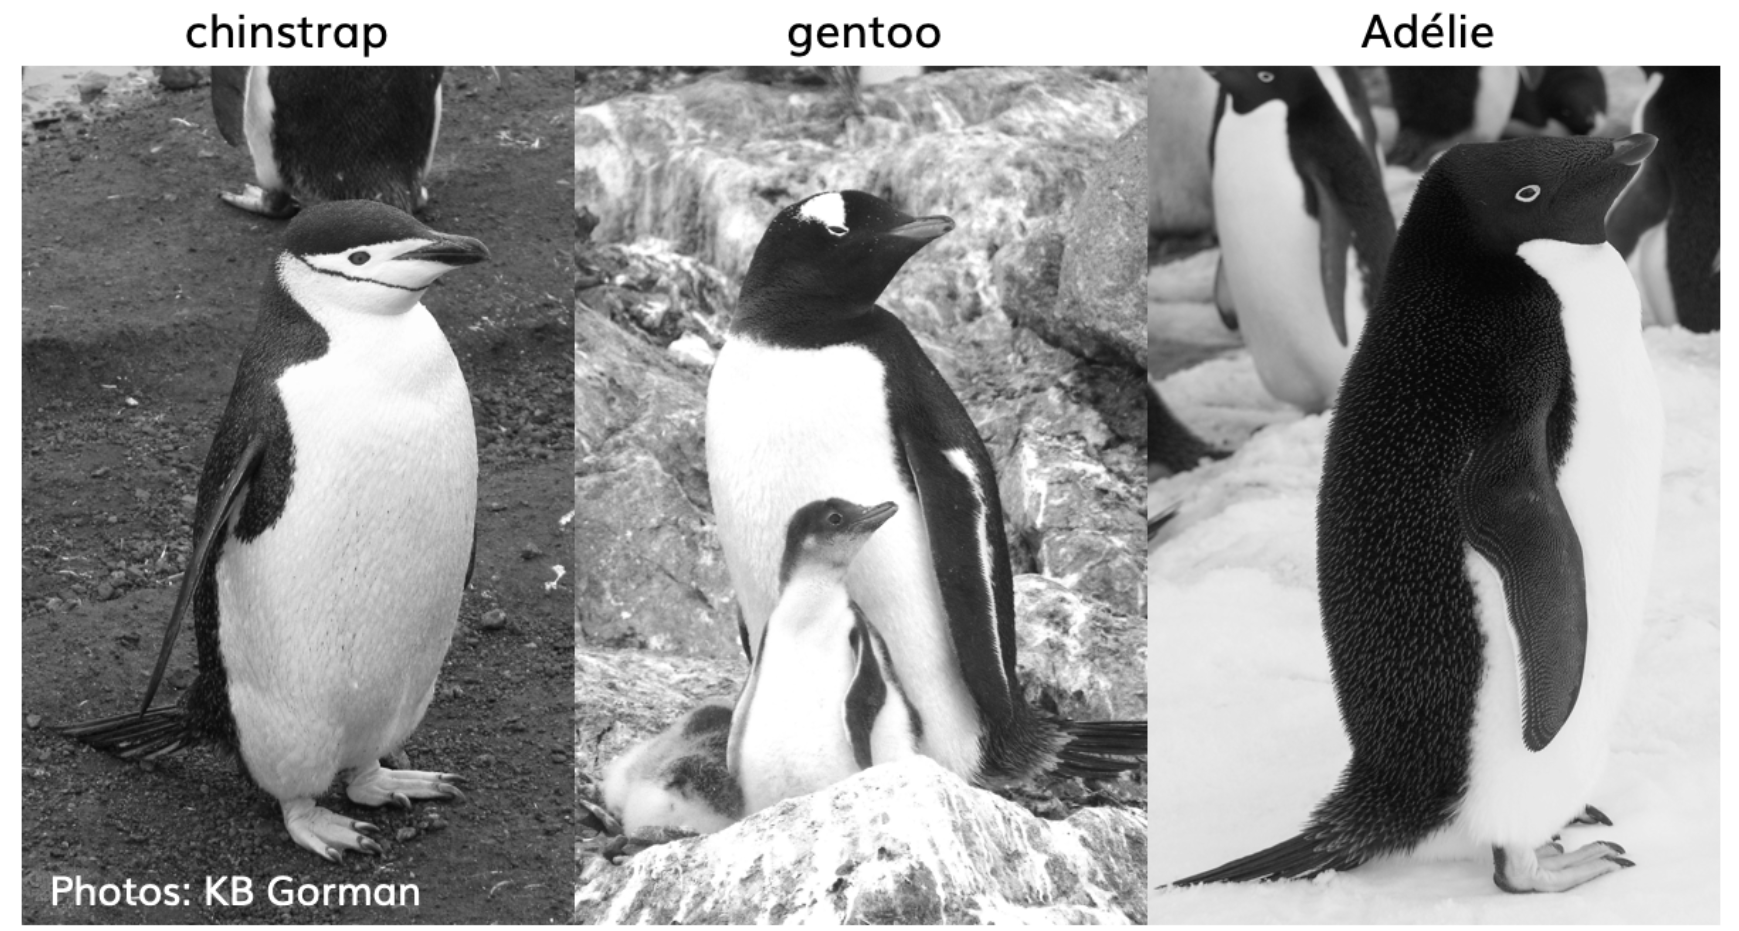 The three penguin species in palmerpenguins. Photos by KB Gorman. Used with permission